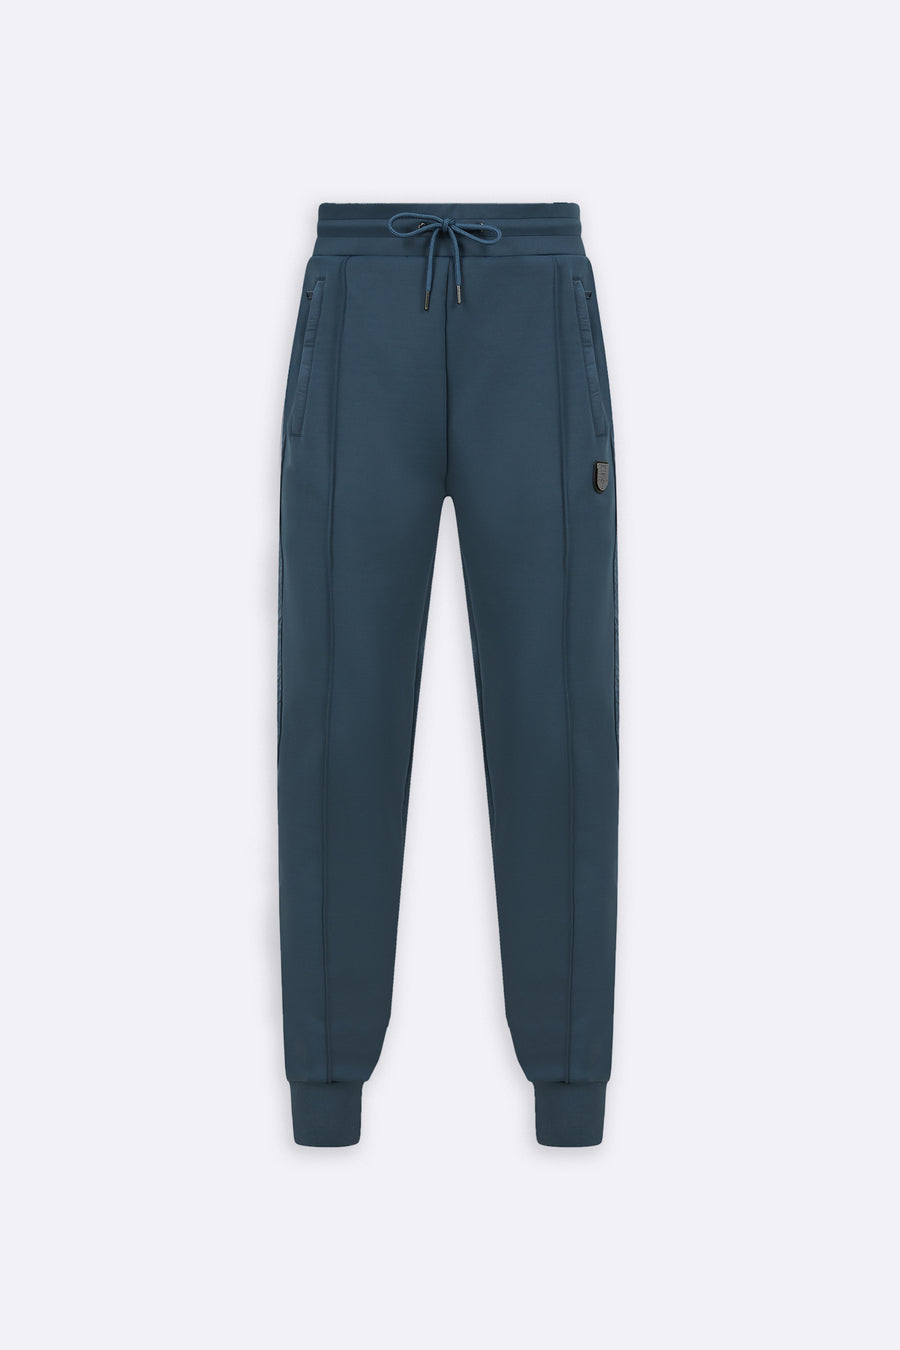 LUXE TRACK PANT (DARK TEAL)